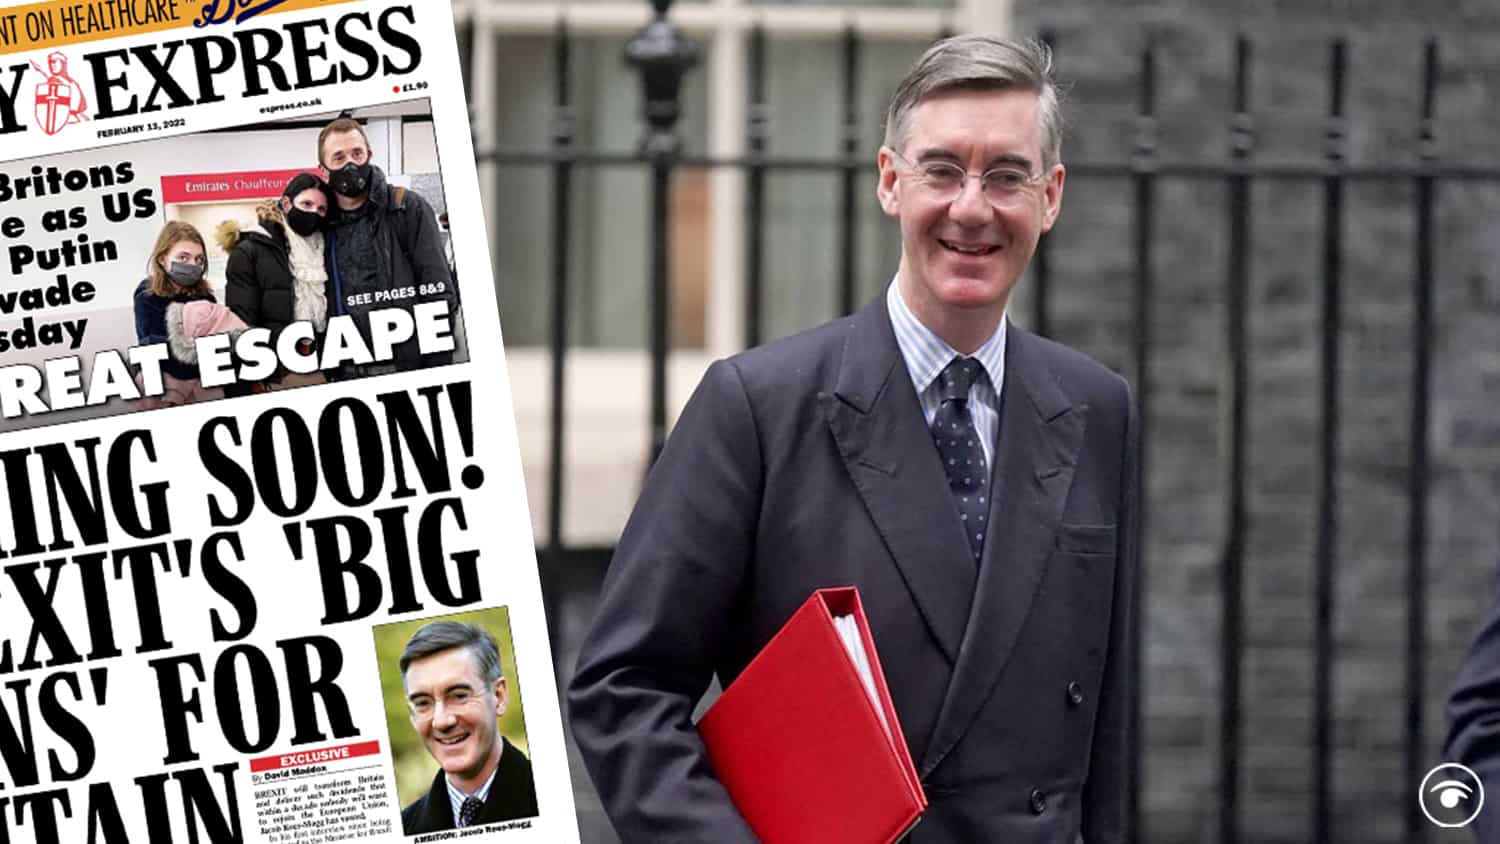 Express trends as Jacob Rees-Mogg says Brexit wins are ‘coming soon’